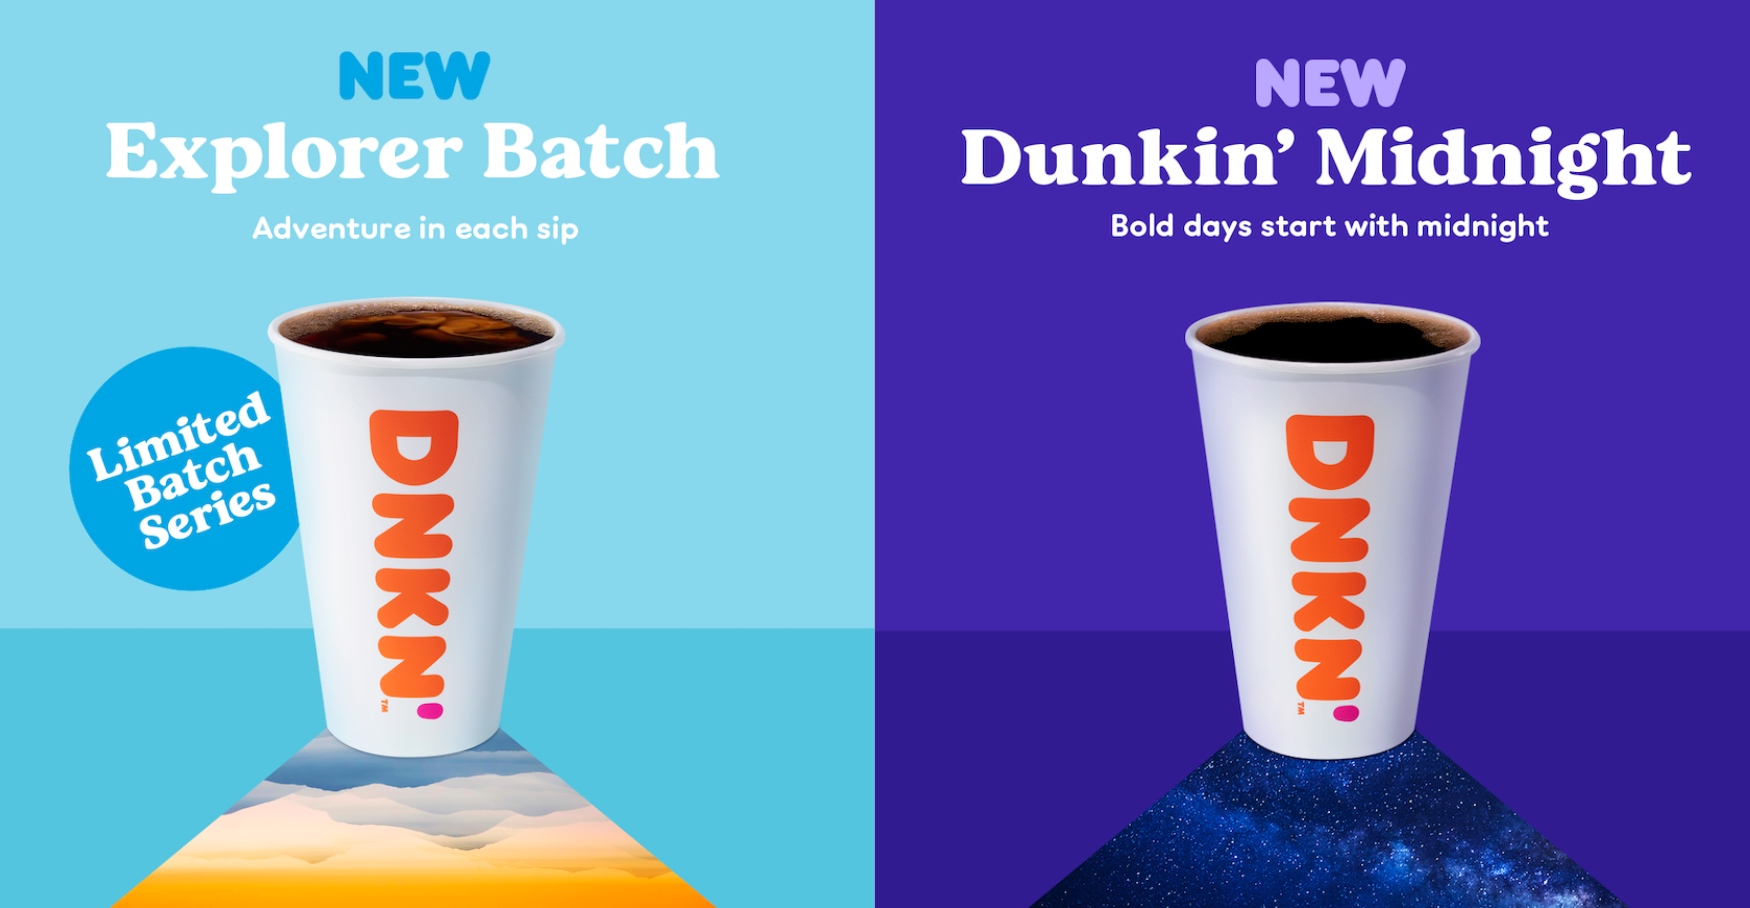 How to Get Free Coffee at Dunkin'